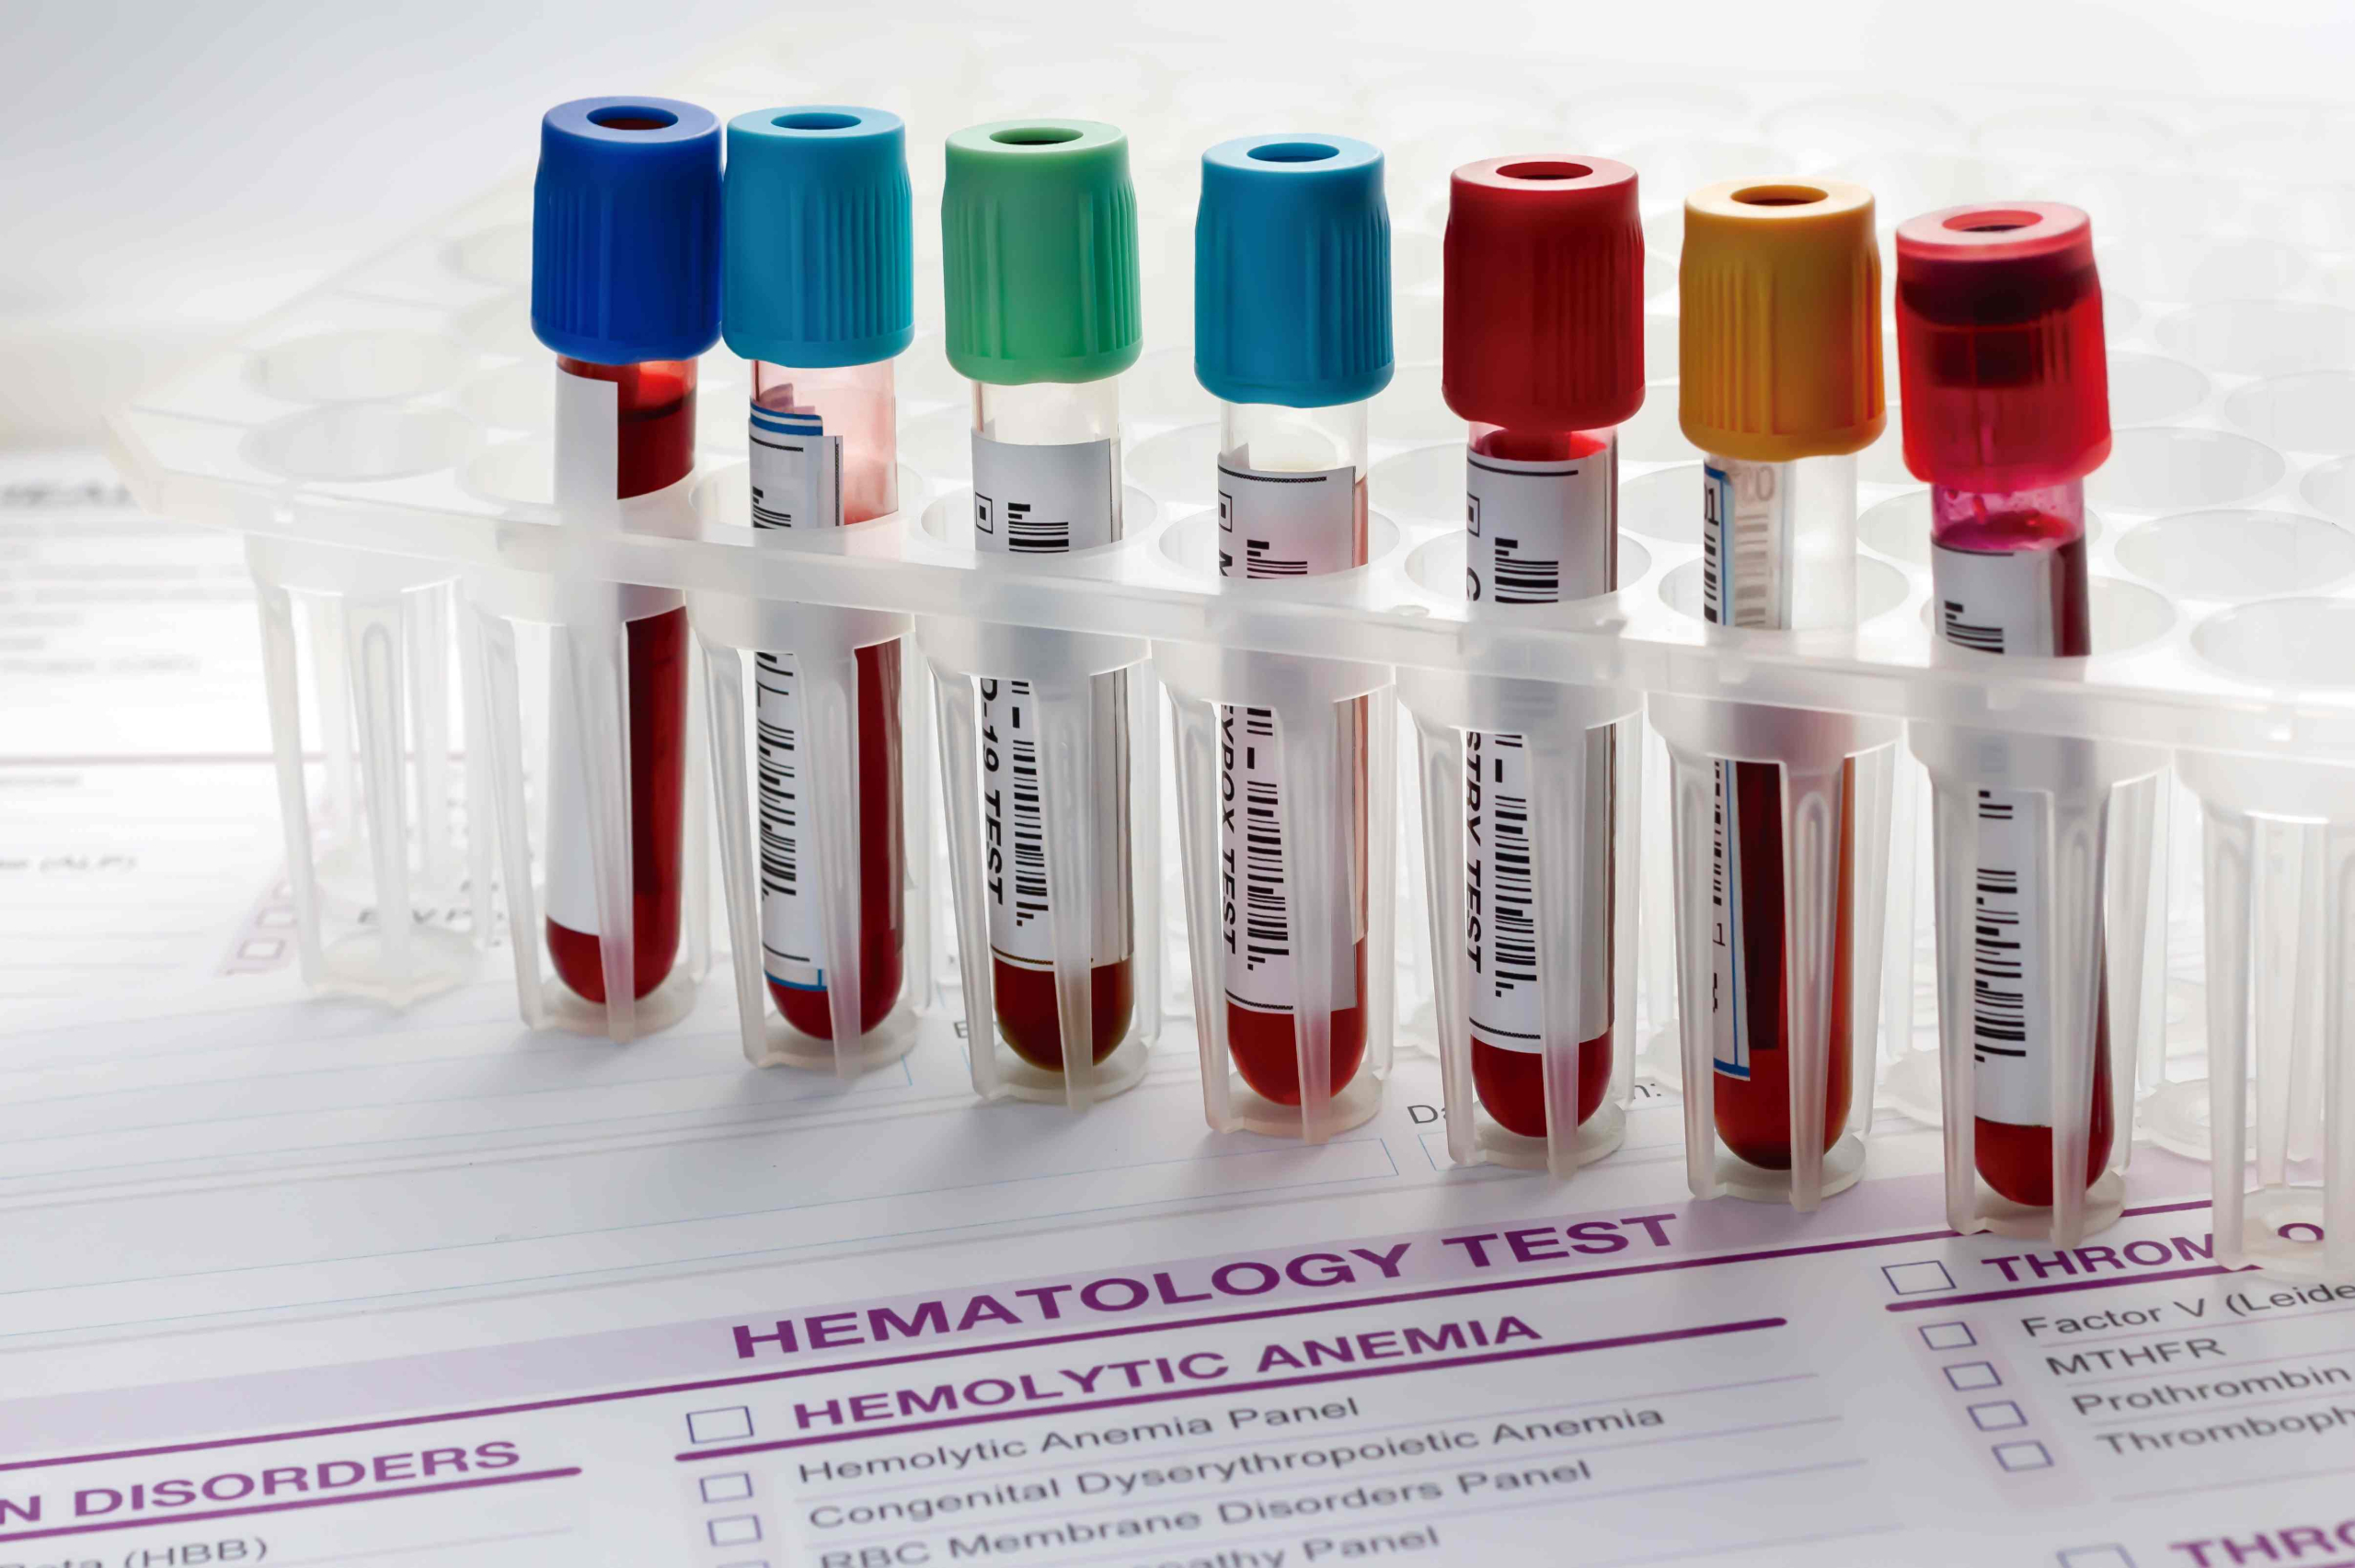 Seven vials of blood samples standing upright in a stand. Below the vials, there is a sheet that reads "hematology test", with various conditions and checkboxes.